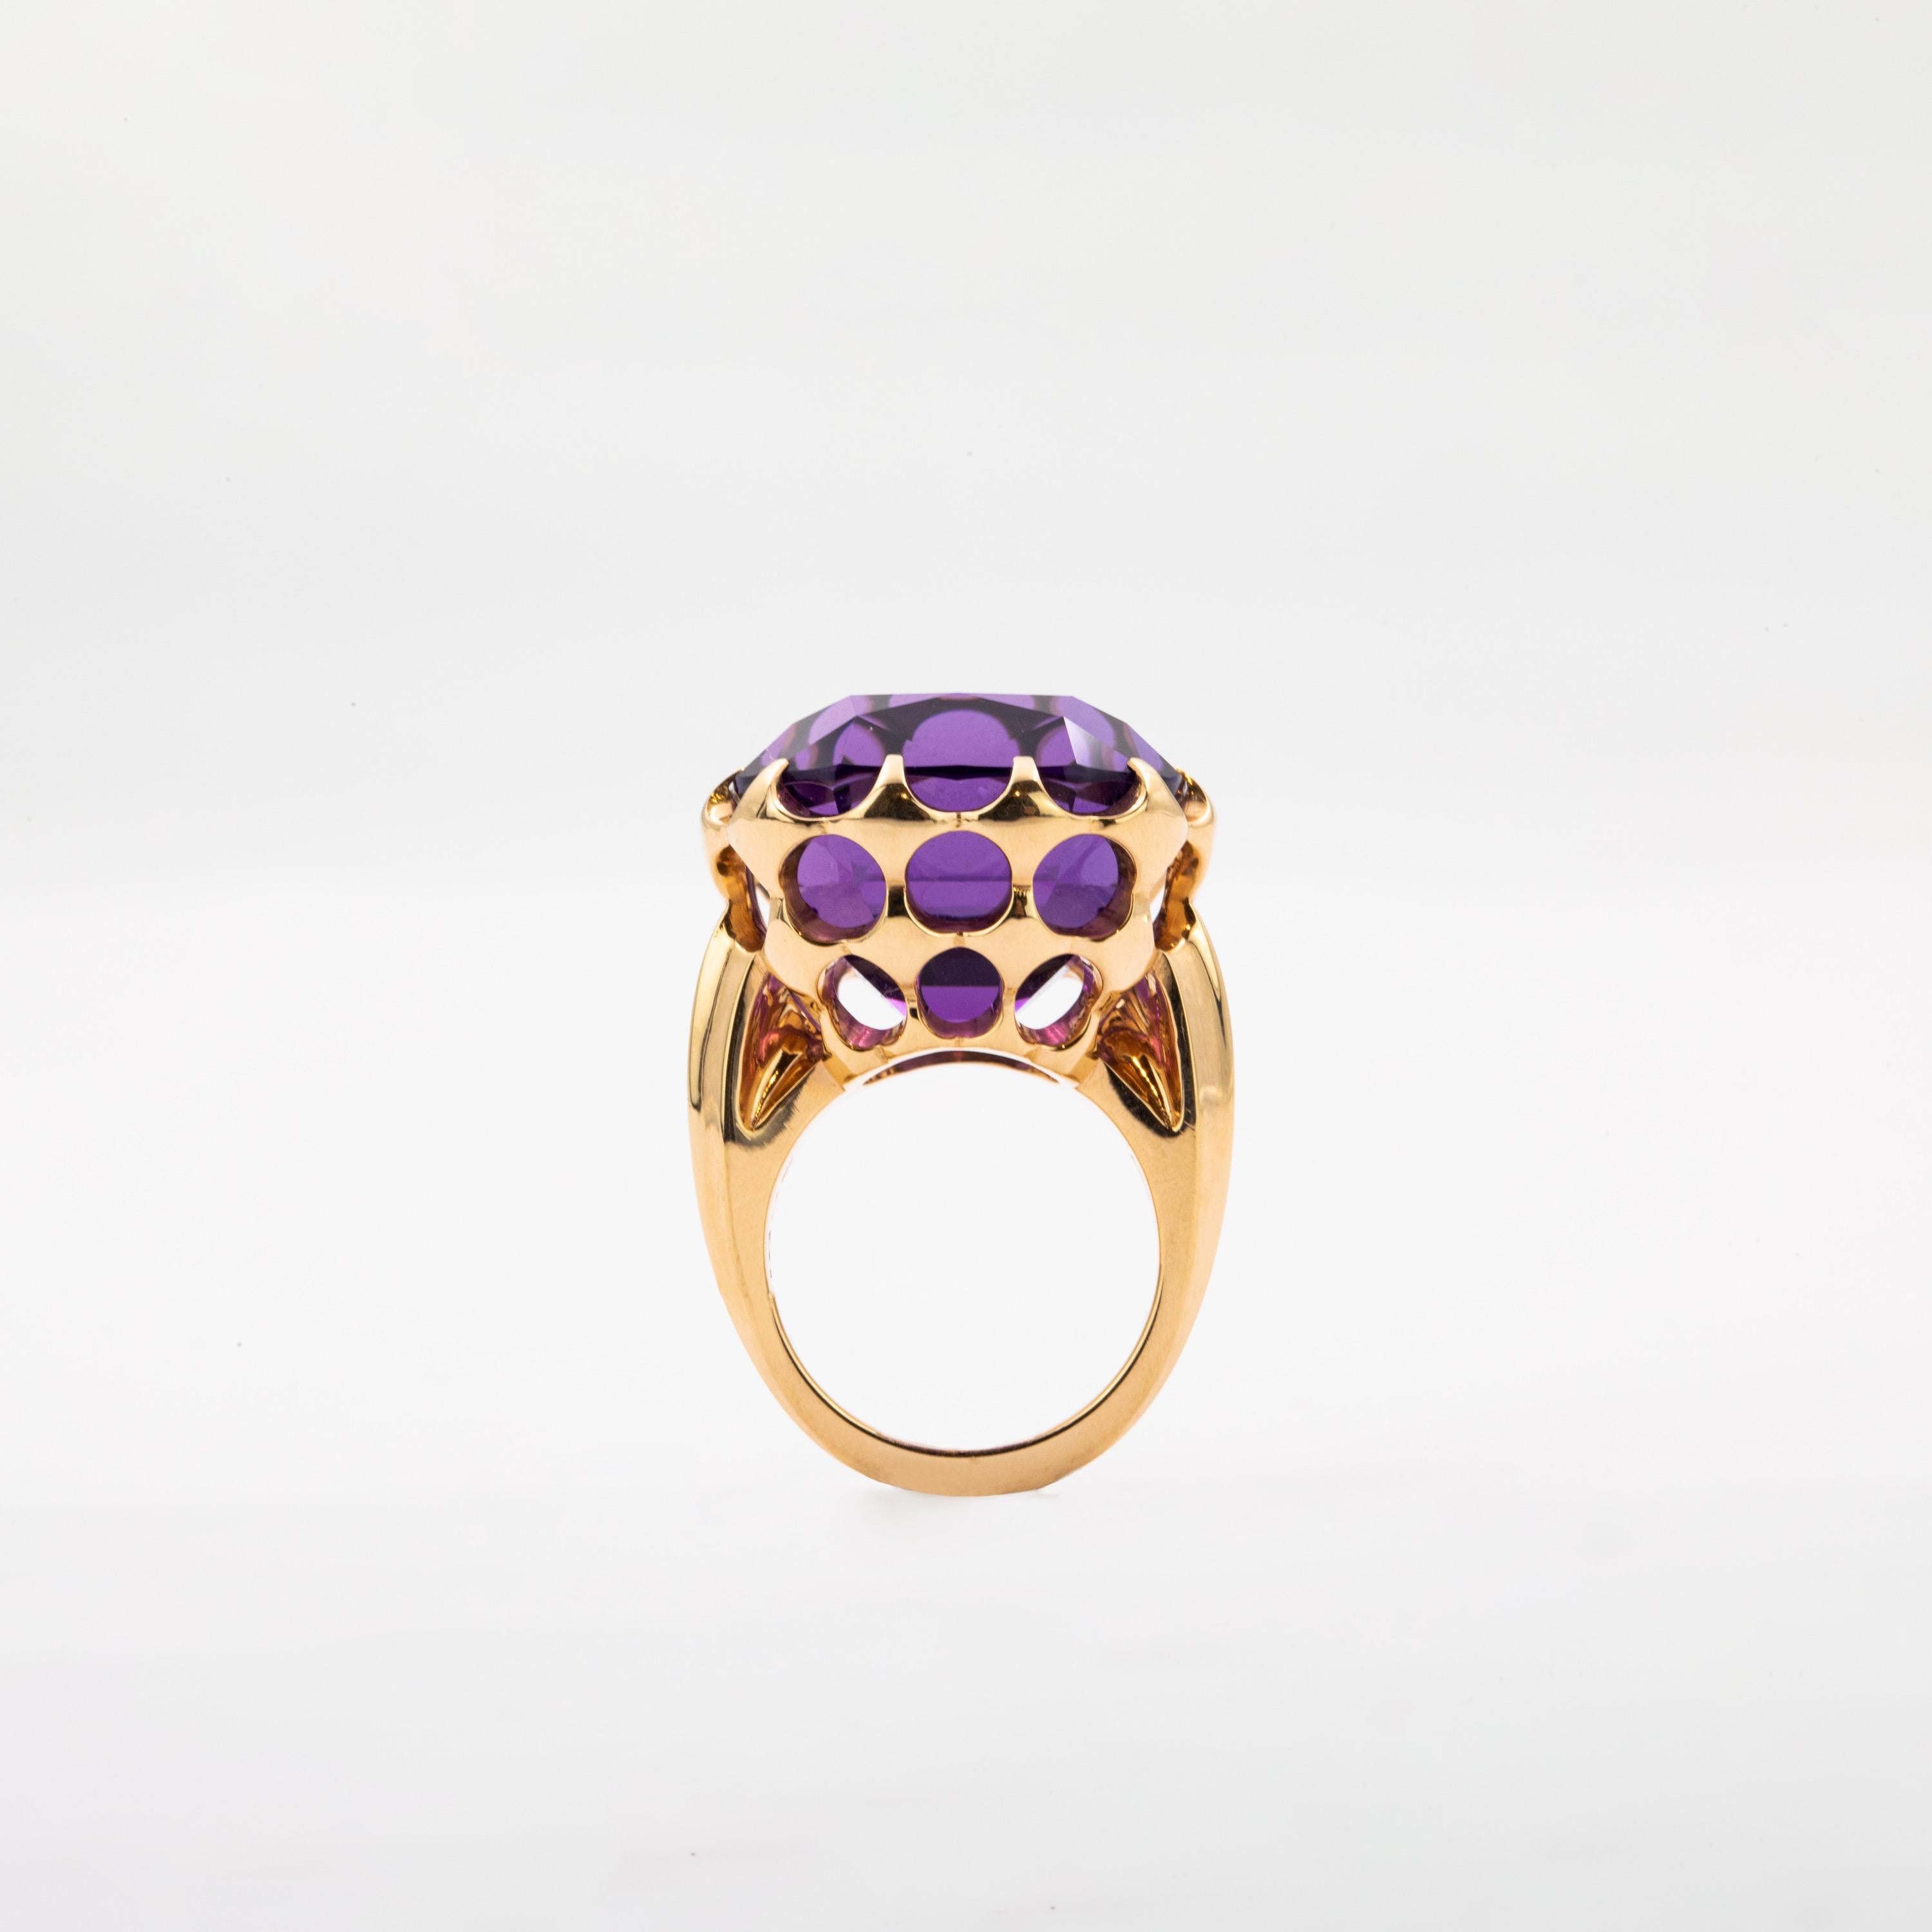 Contemporary 37.38 Carat Handmade Pink Gold Cushion-Cut Amethyst Cocktail Ring For Sale